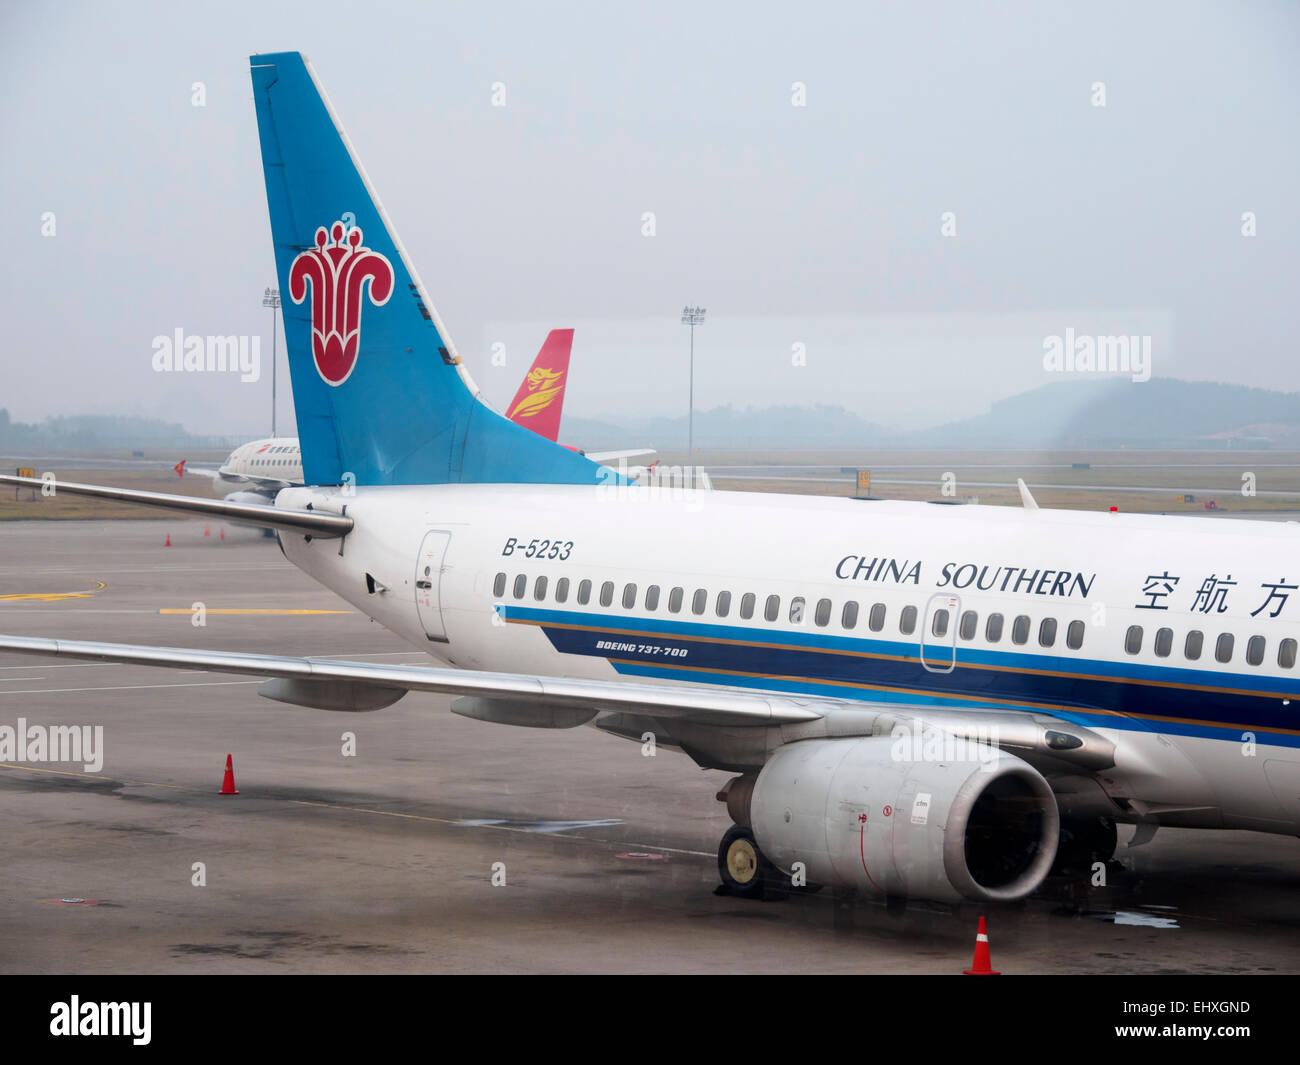 China Southern airlines airplane Stock Photo